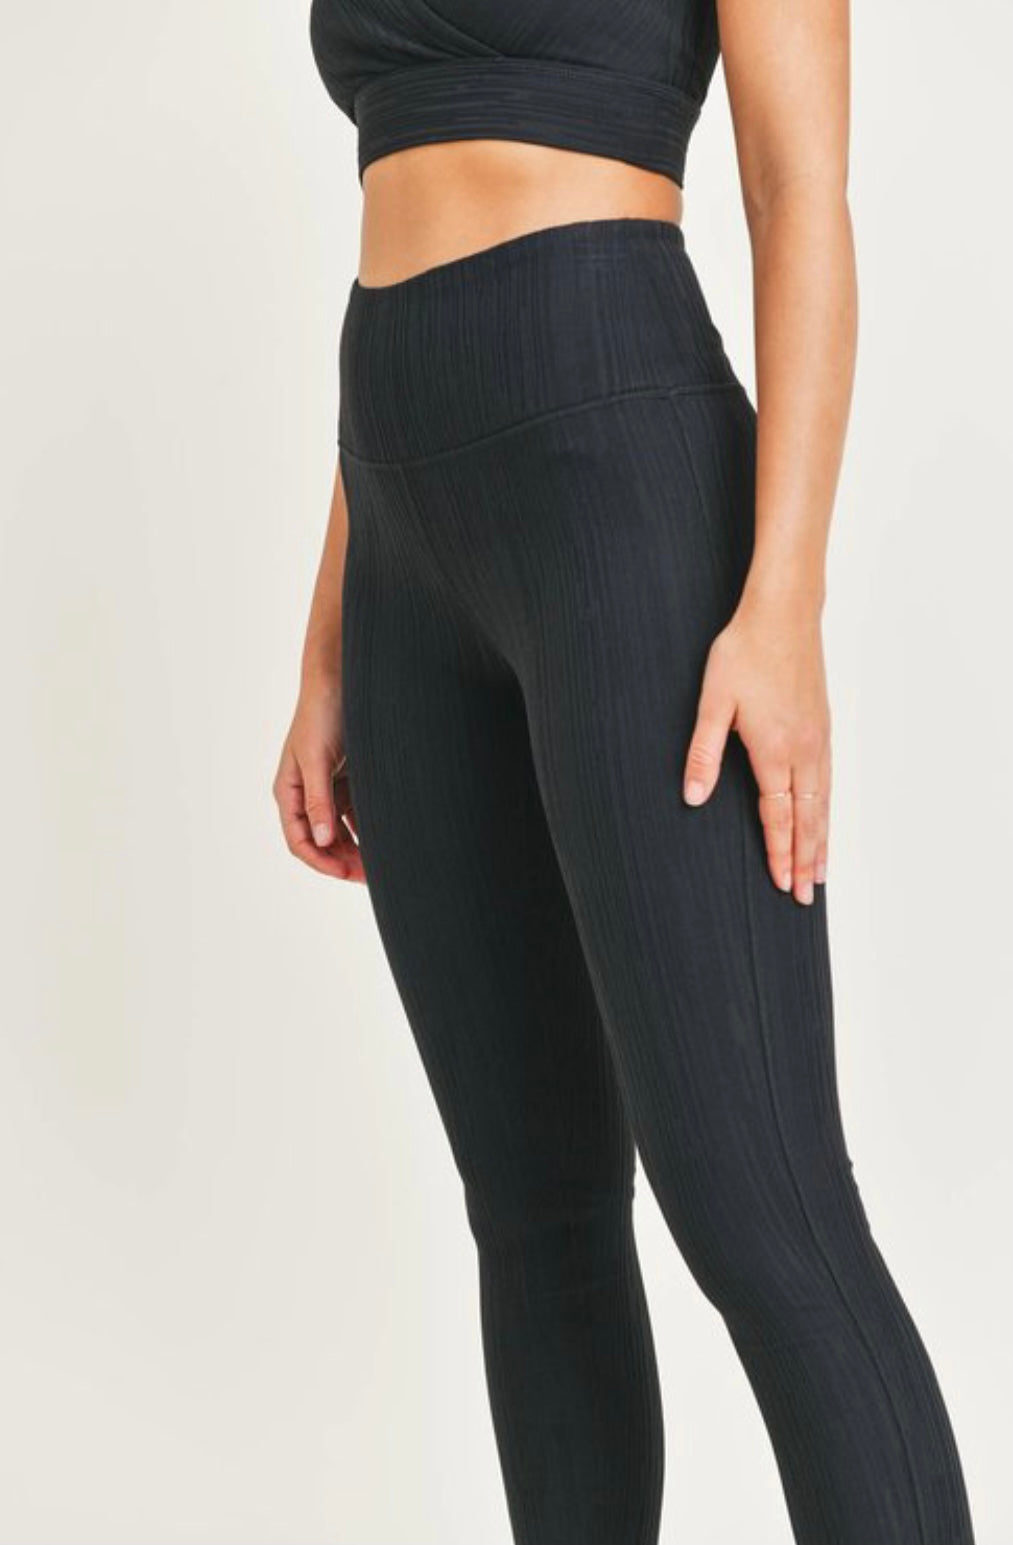 Lululemon black size 6 cropped leggings preppy activewear athleisure cute  comfy - $45 - From Abby